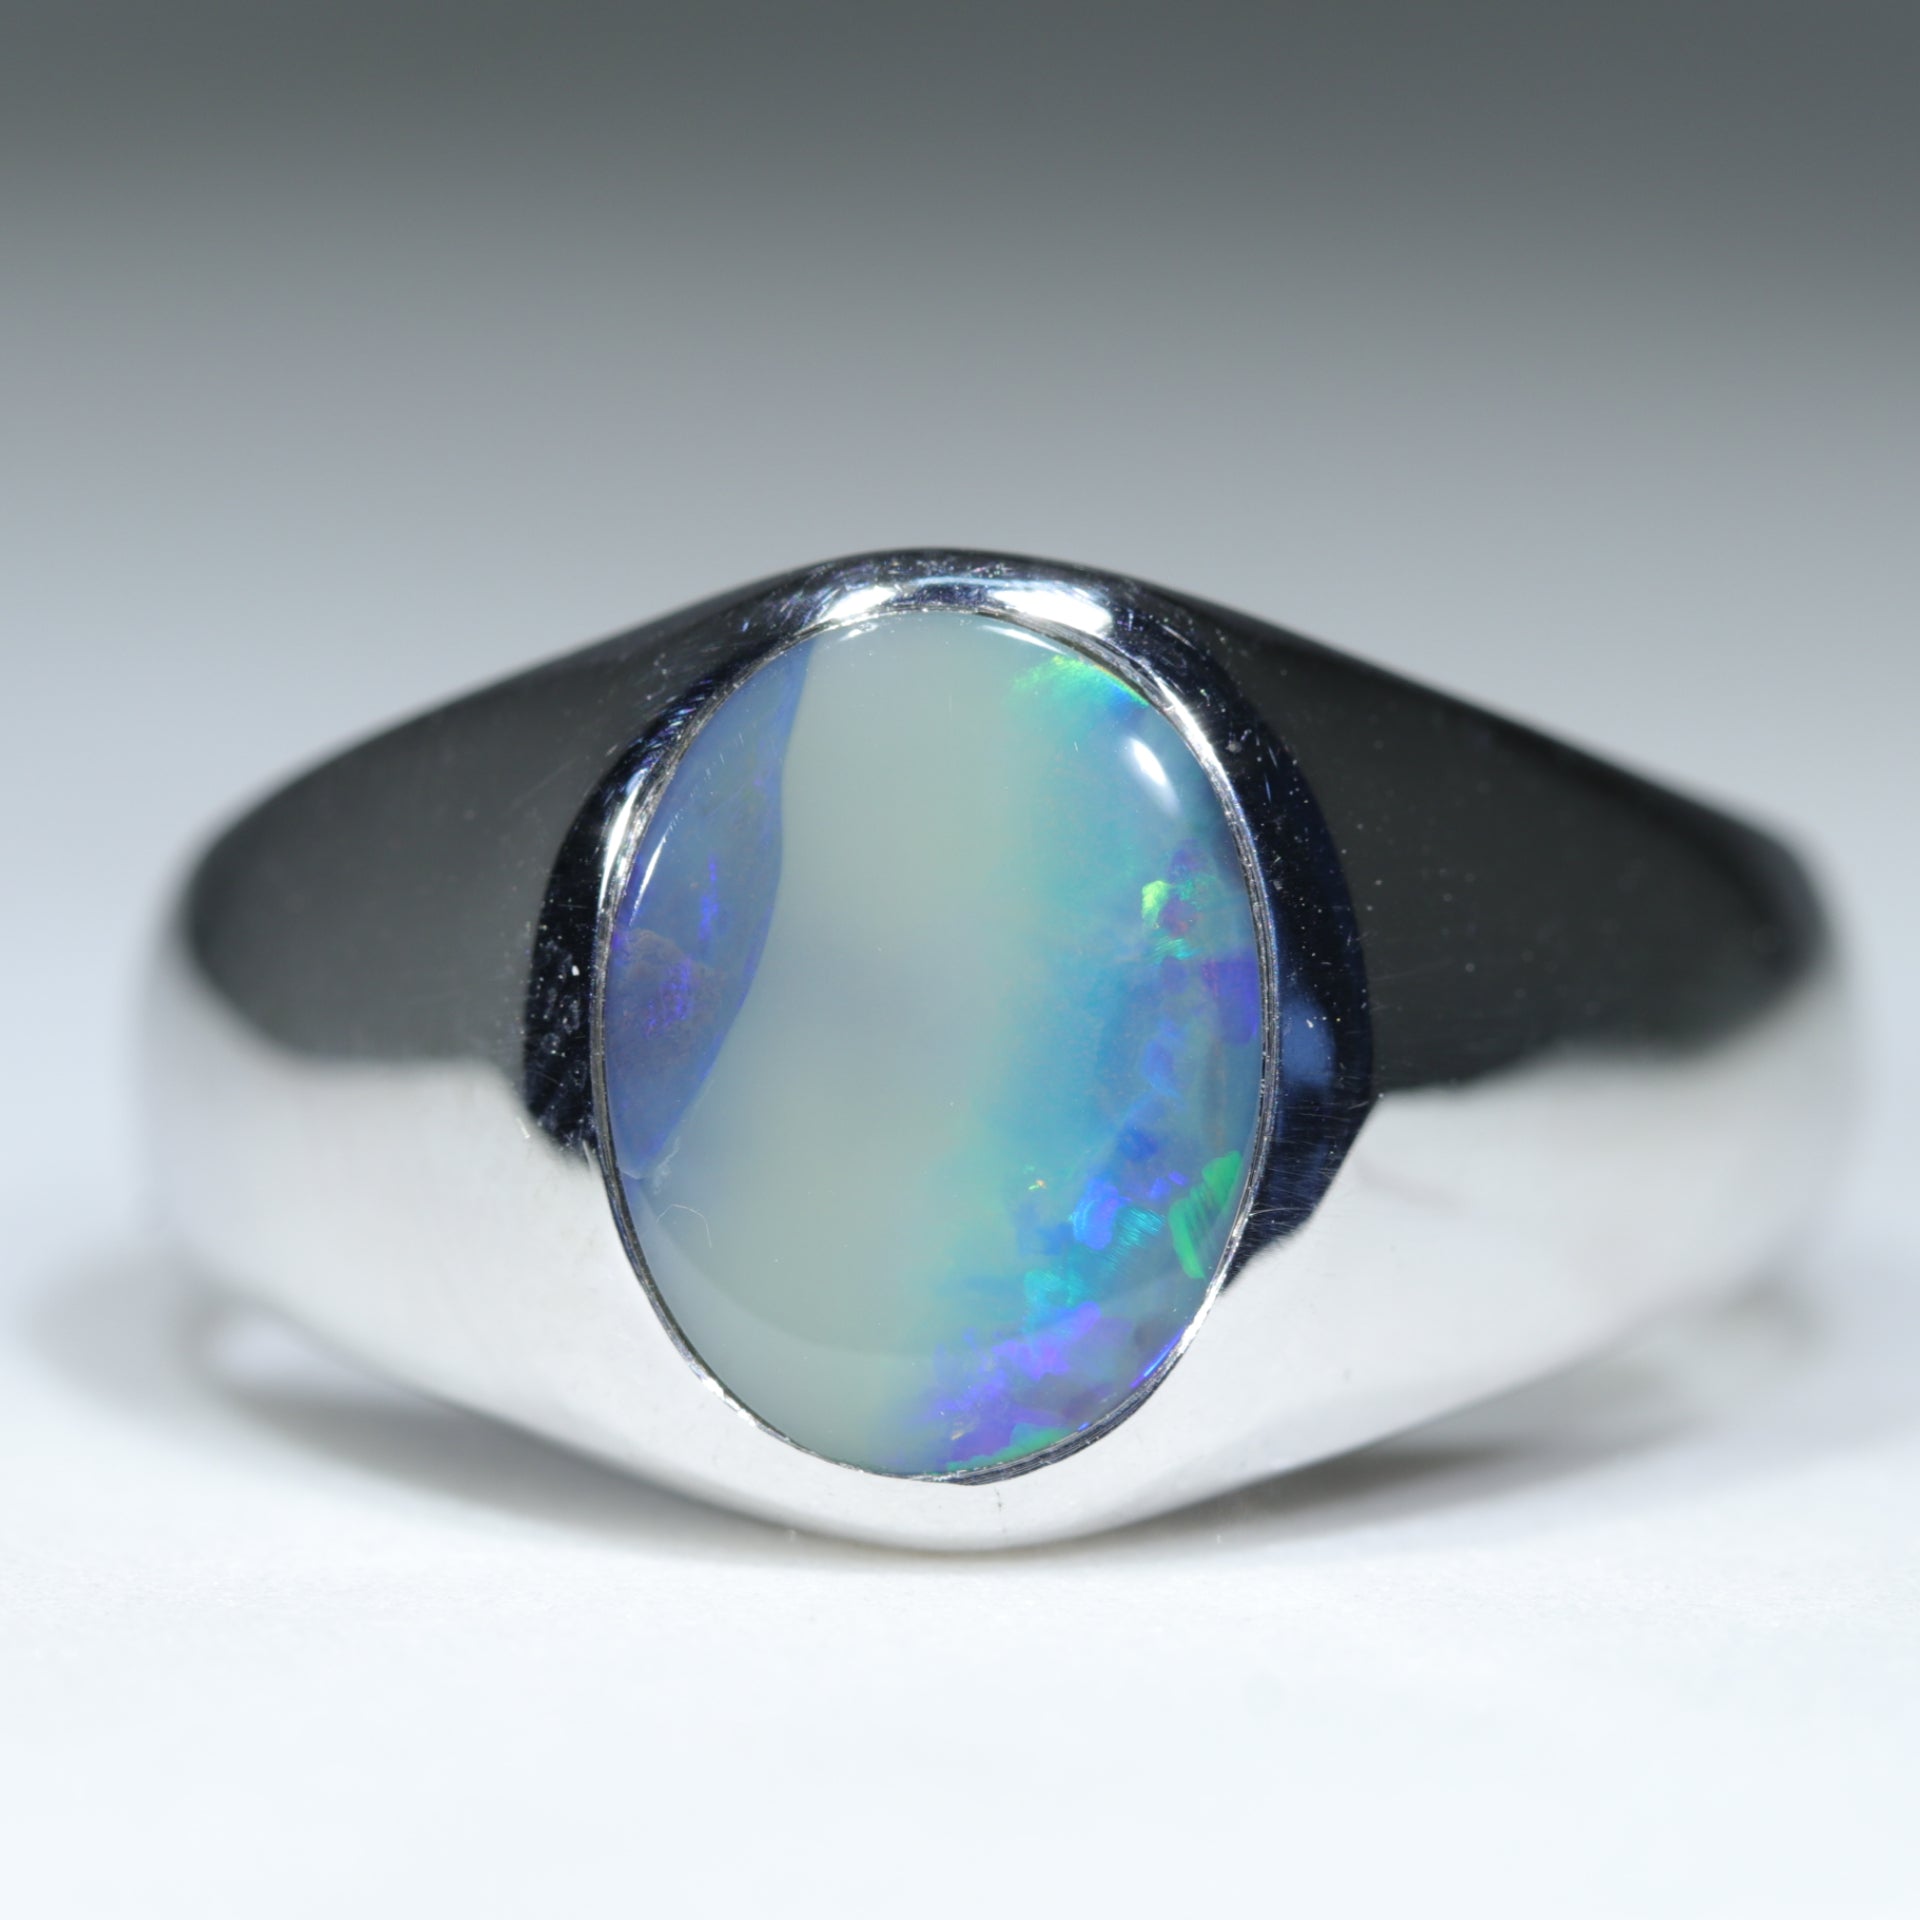 View from a Rainbow Australian Opal Ring | Opal Rings for Sale | NIXIN